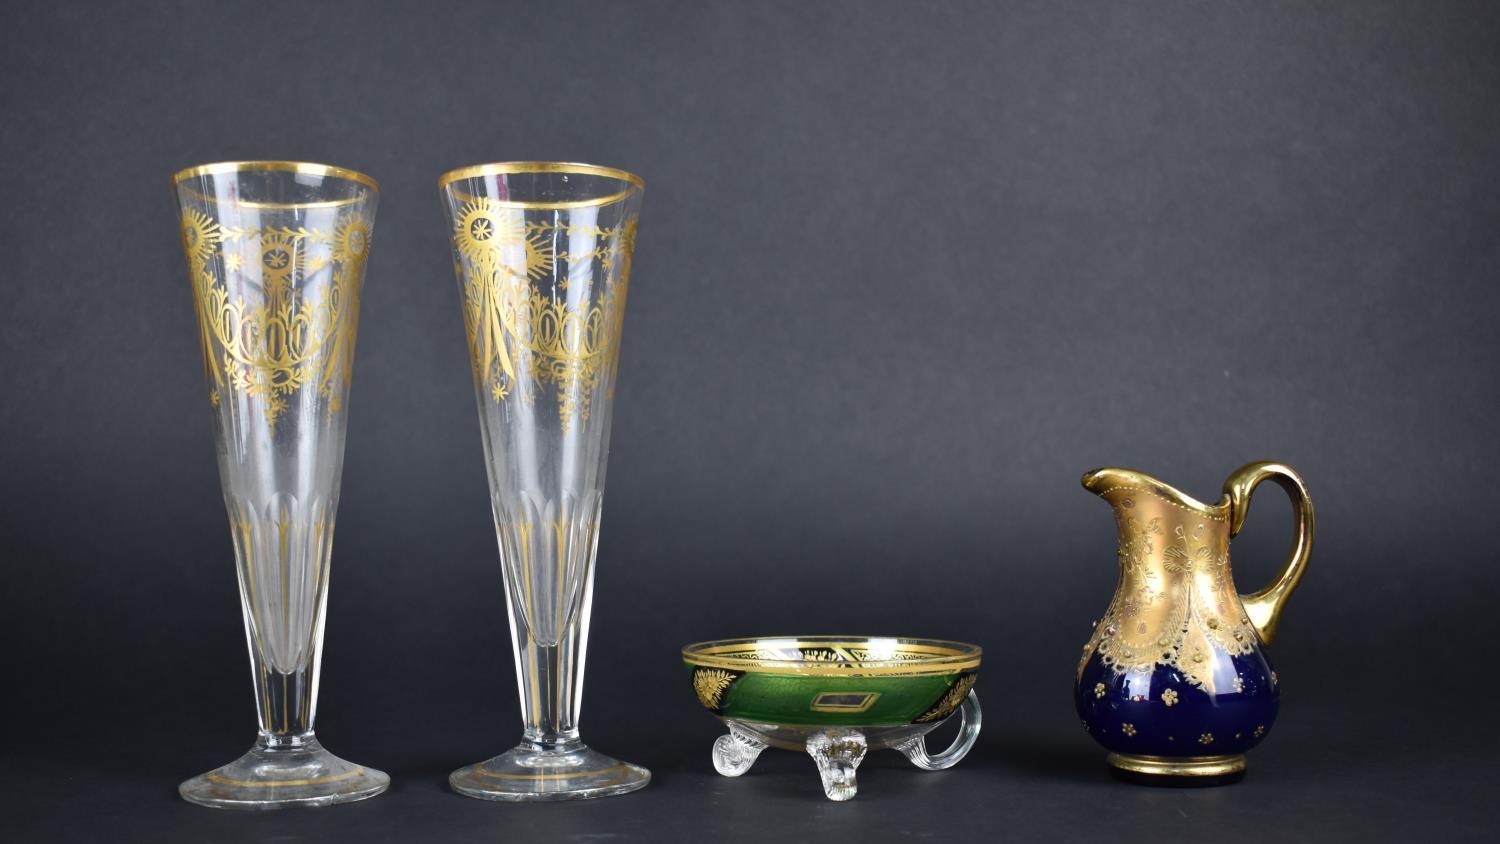 A Pair of 19th Century Drinking Glasses with Flute Bowls Decorated in Gilt with Swag Decoration 19.